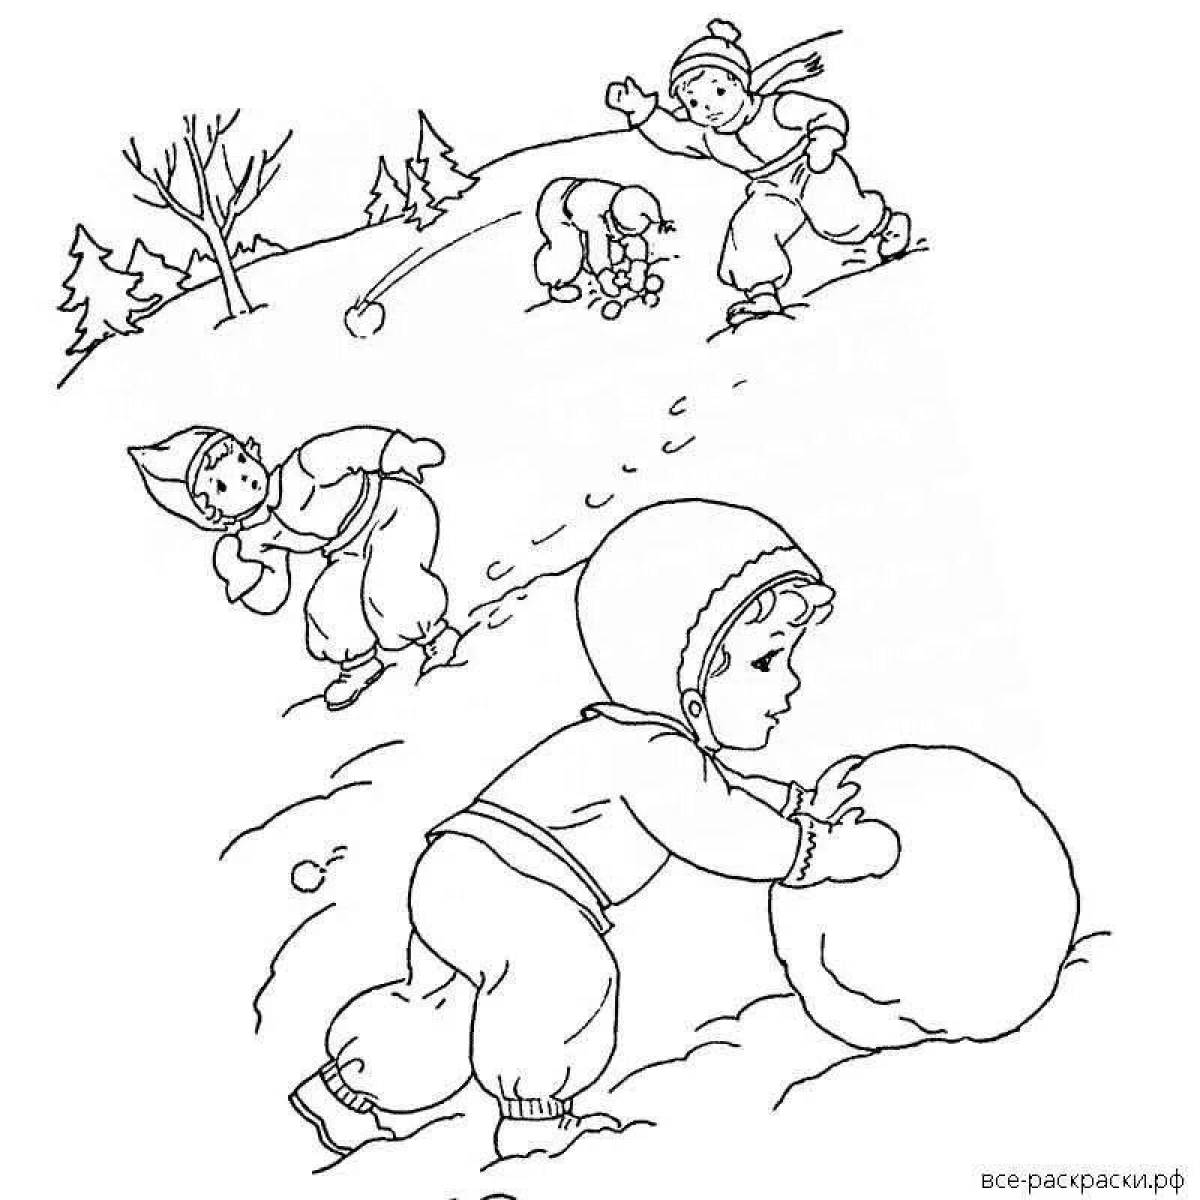 Blissful winter walk coloring page